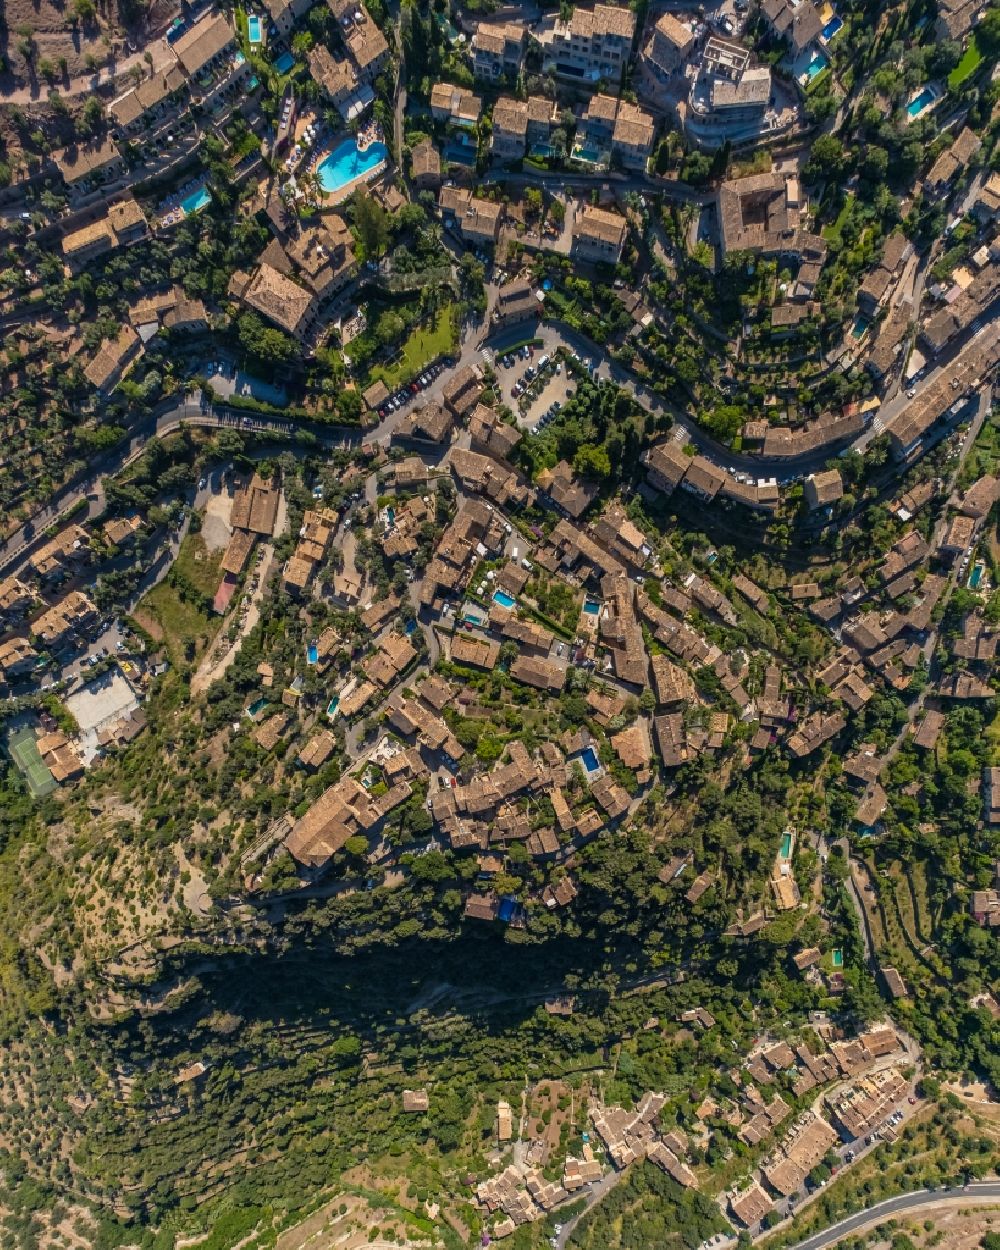 Vertical aerial photograph Deia - Vertical aerial view from the satellite perspective of the location view of the streets and houses of residential areas in the valley landscape surrounded by mountains and forest in Deia in Balearic island of Mallorca, Spain